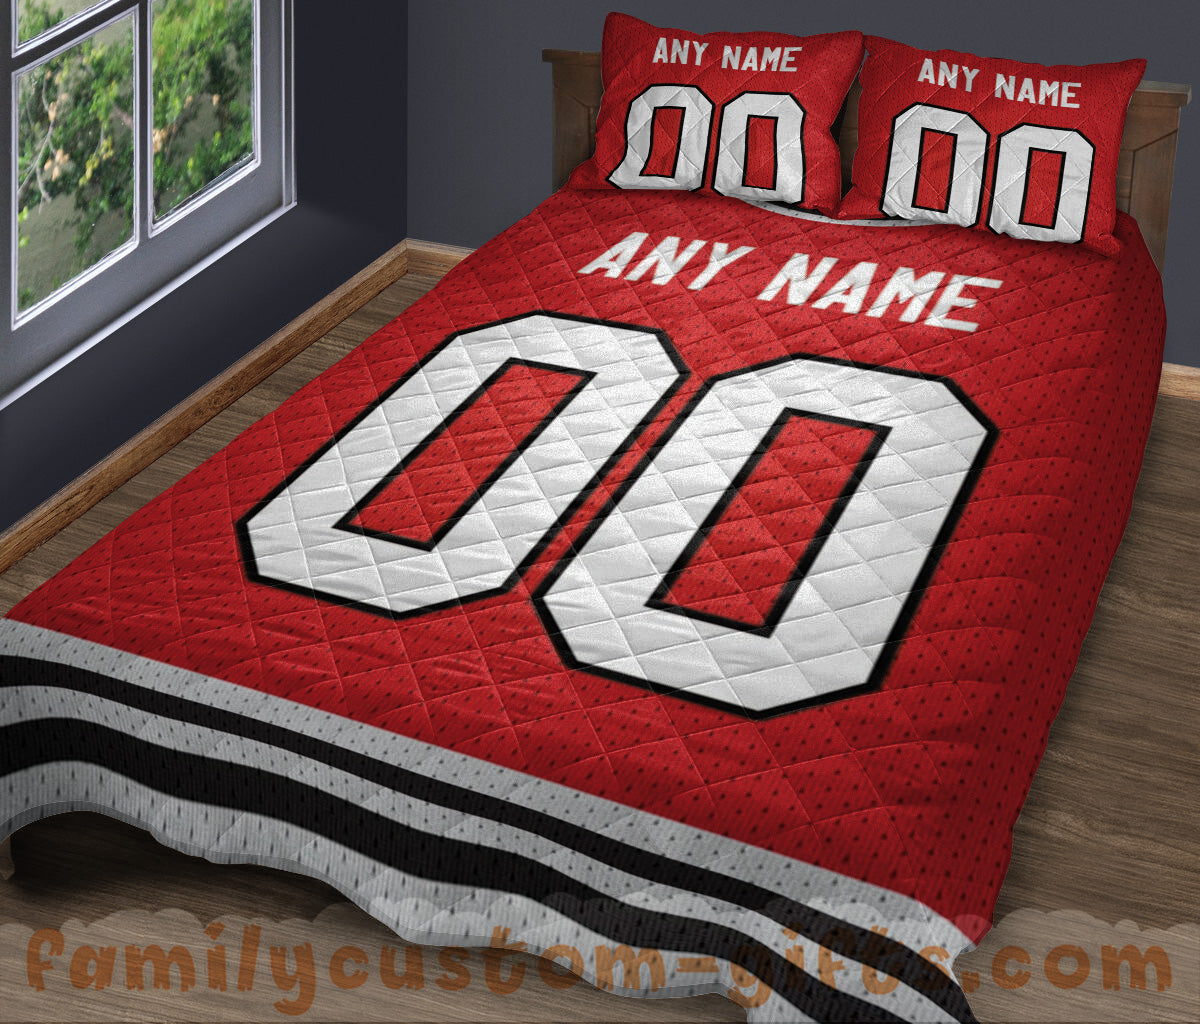 Custom Quilt Sets Chicago Jersey Personalized Ice Hockey Premium Quilt Bedding for Men Women